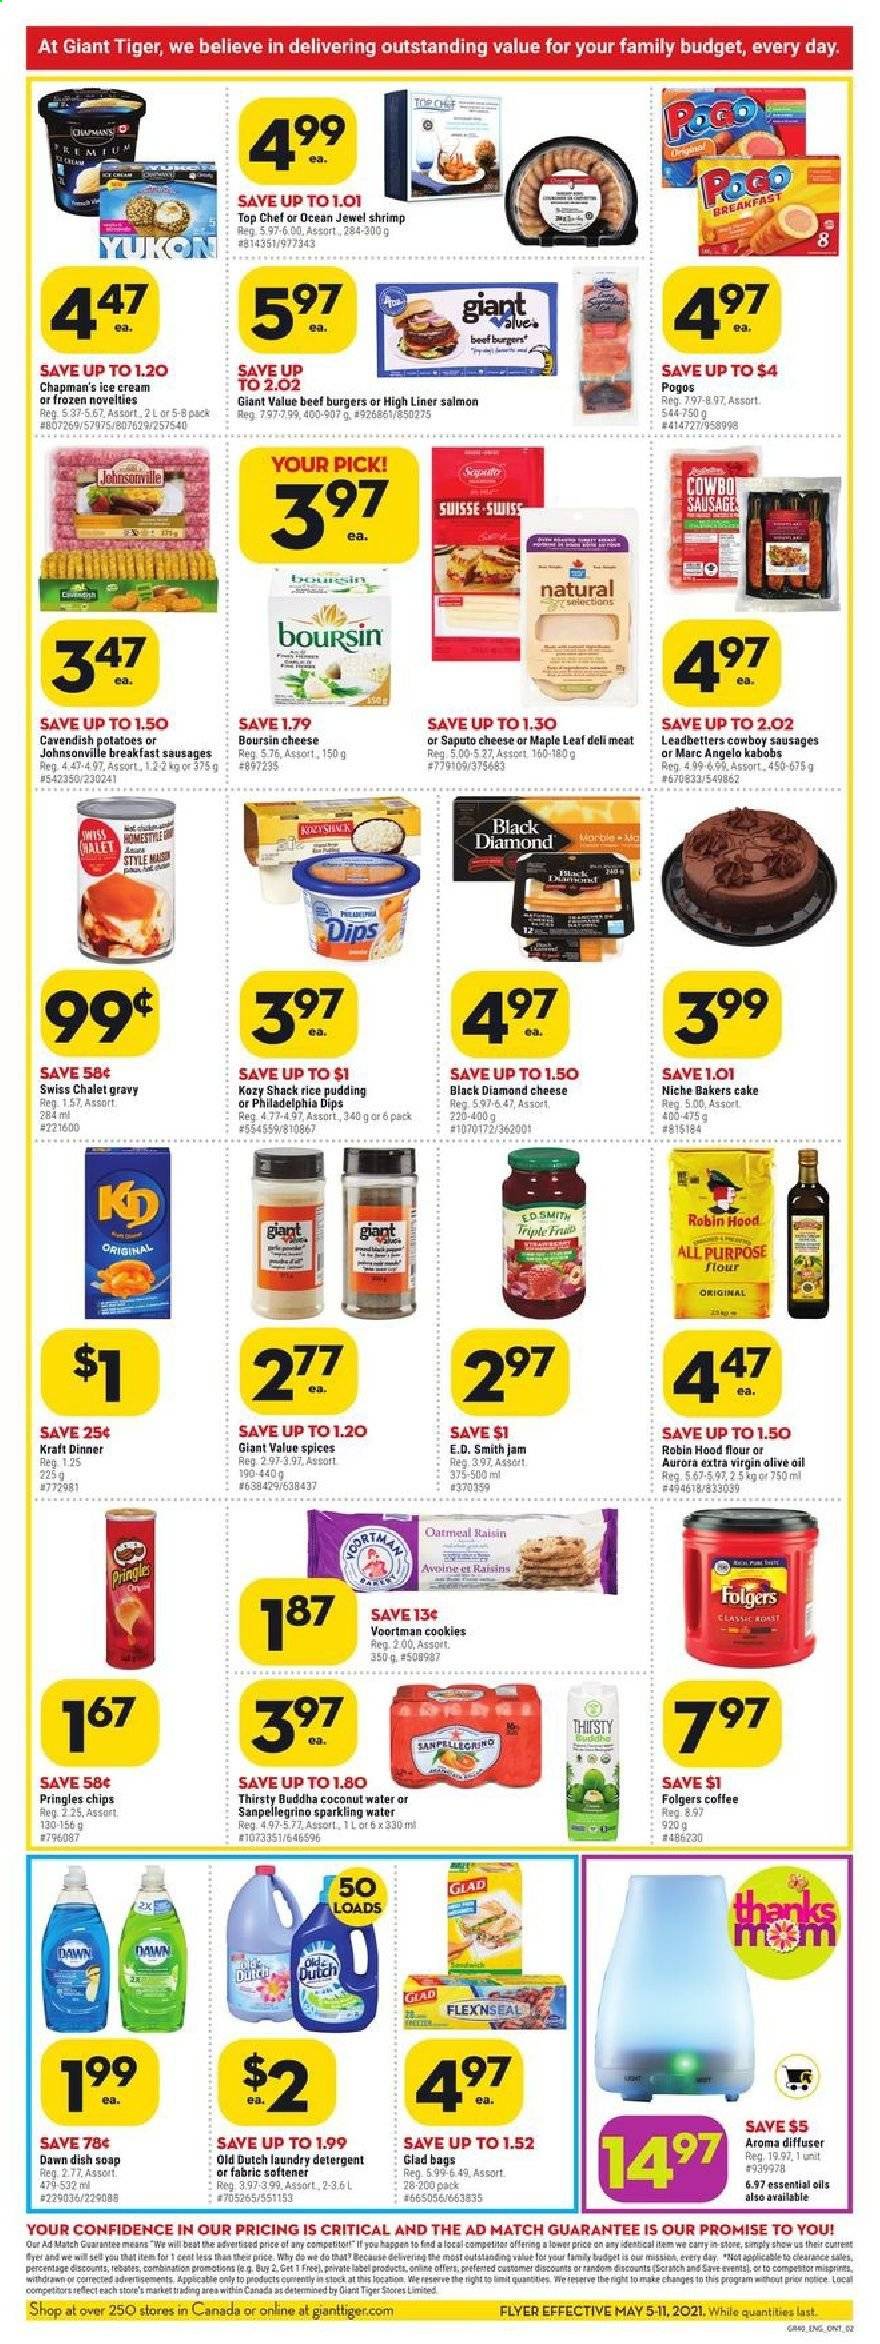 thumbnail - Giant Tiger Flyer - May 05, 2021 - May 11, 2021 - Sales products - cake, potatoes, salmon, shrimps, hamburger, beef burger, Kraft®, Johnsonville, sausage, rice pudding, ice cream, cookies, Pringles, flour, oatmeal, extra virgin olive oil, fruit jam, dried fruit, coconut water, sparkling water, coffee, Folgers, fabric softener, laundry detergent, soap, diffuser, essential oils, Bakers, raisins. Page 2.